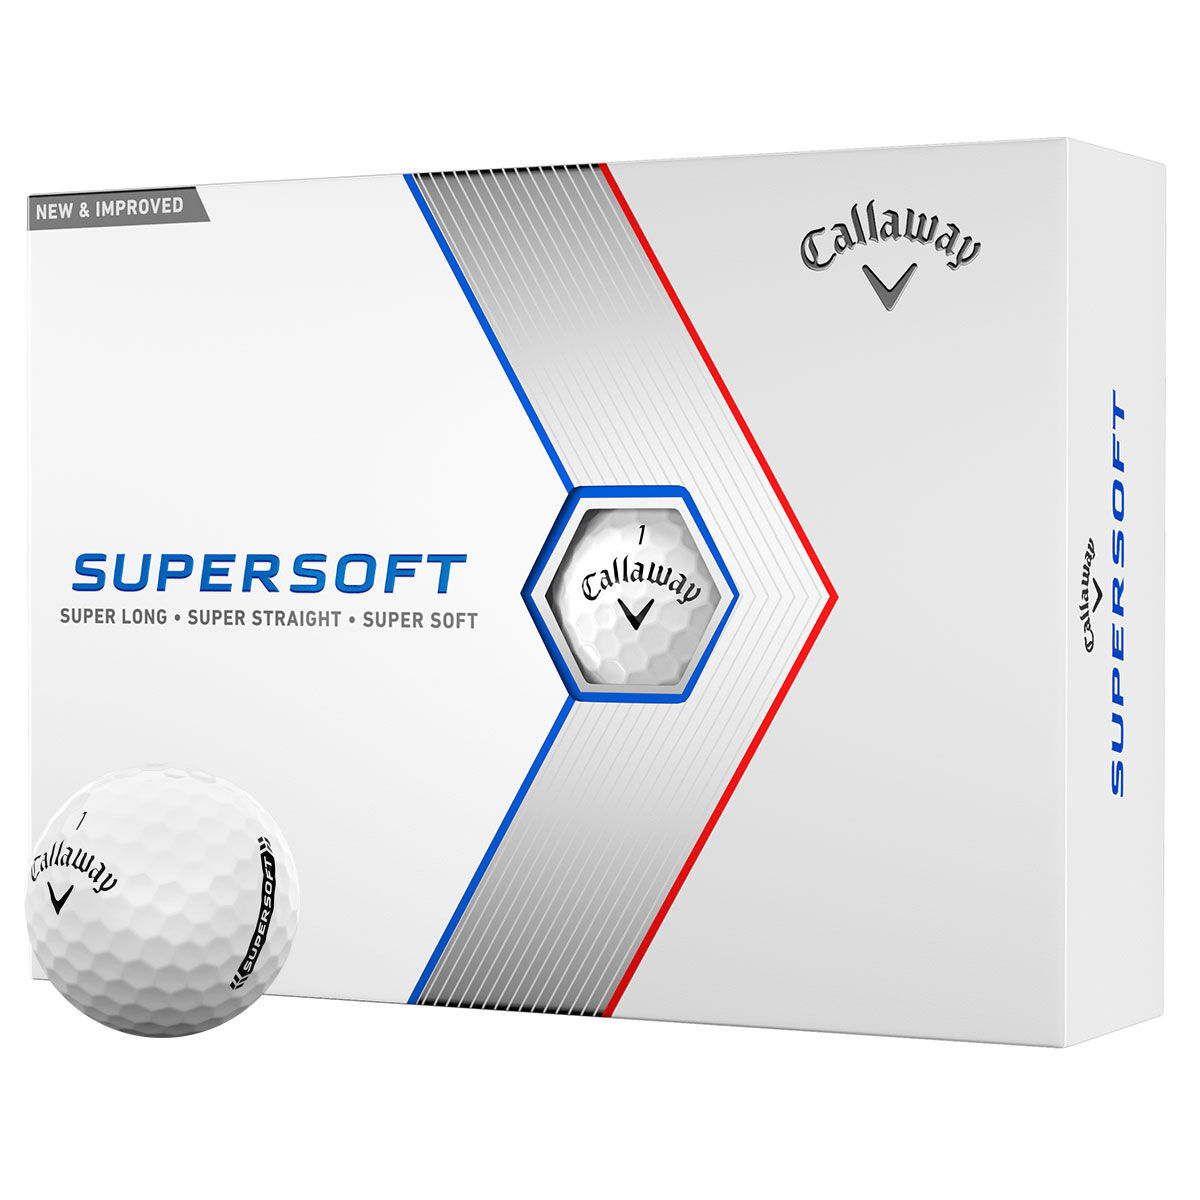 Callaway Golf White Supersoft 12 Golf Ball Pack | American Golf, One Size